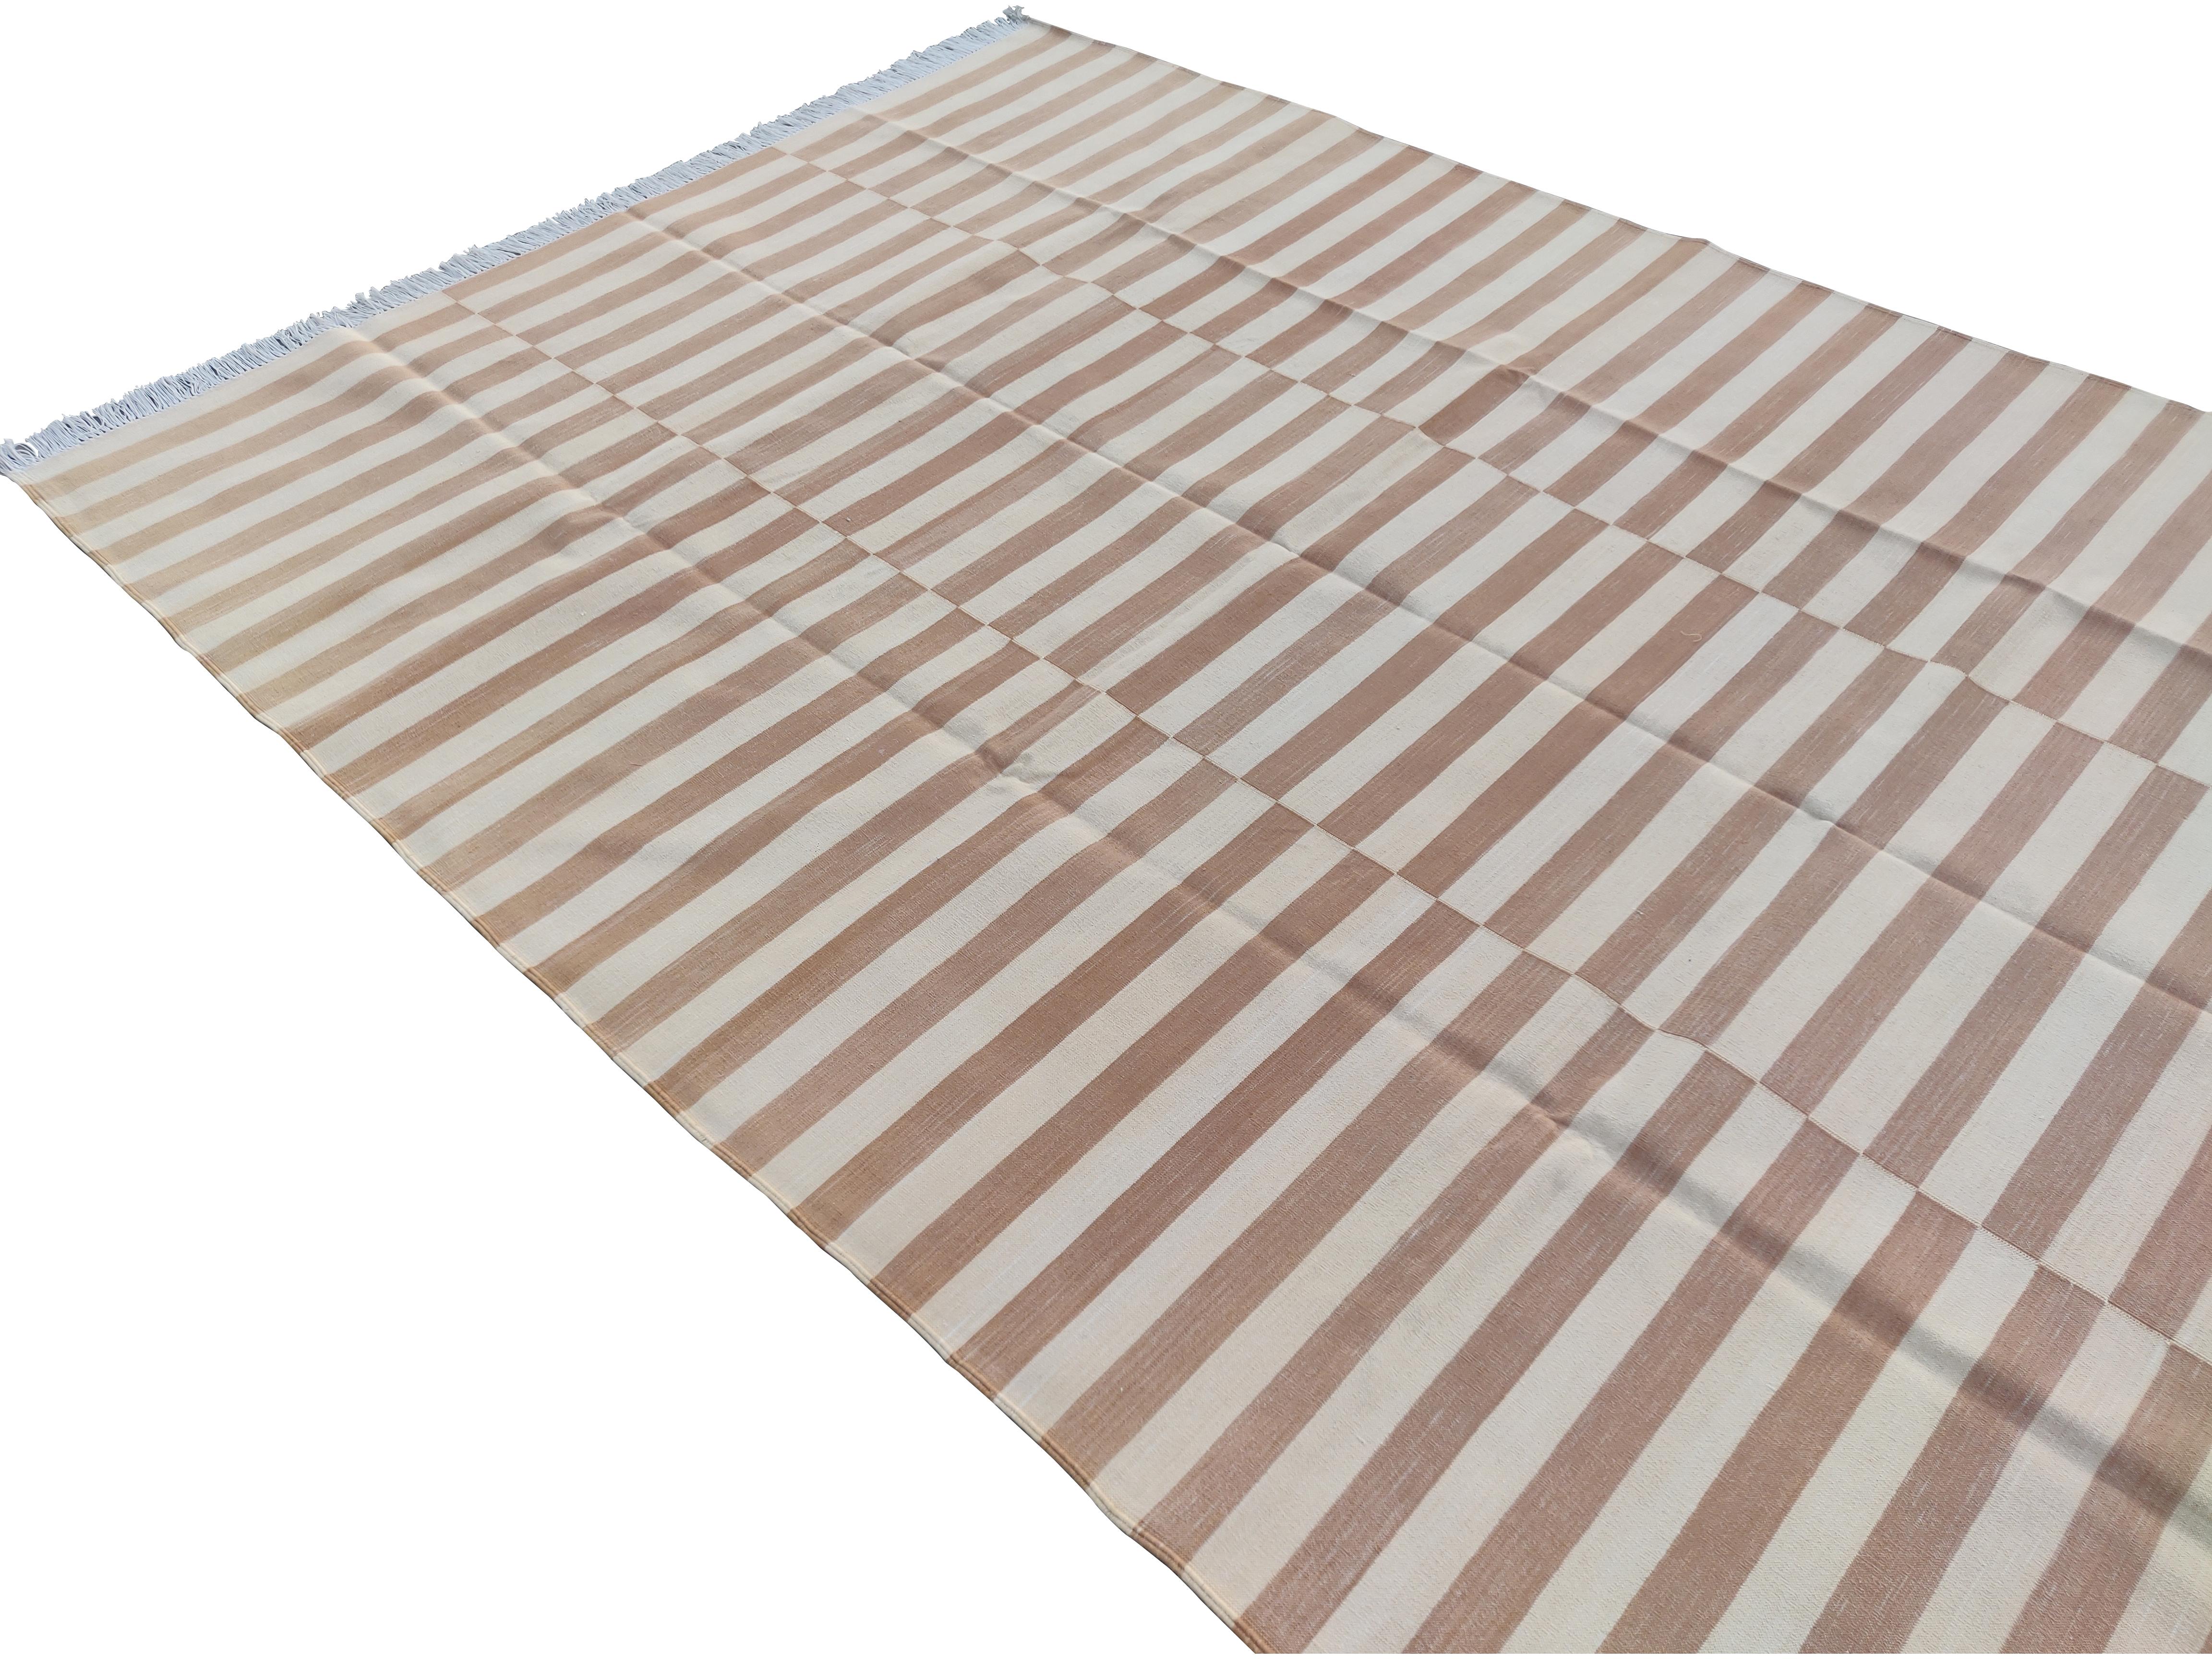 Handmade Cotton Area Flat Weave Rug, 6x9 Tan And Cream Striped Indian Dhurrie For Sale 2